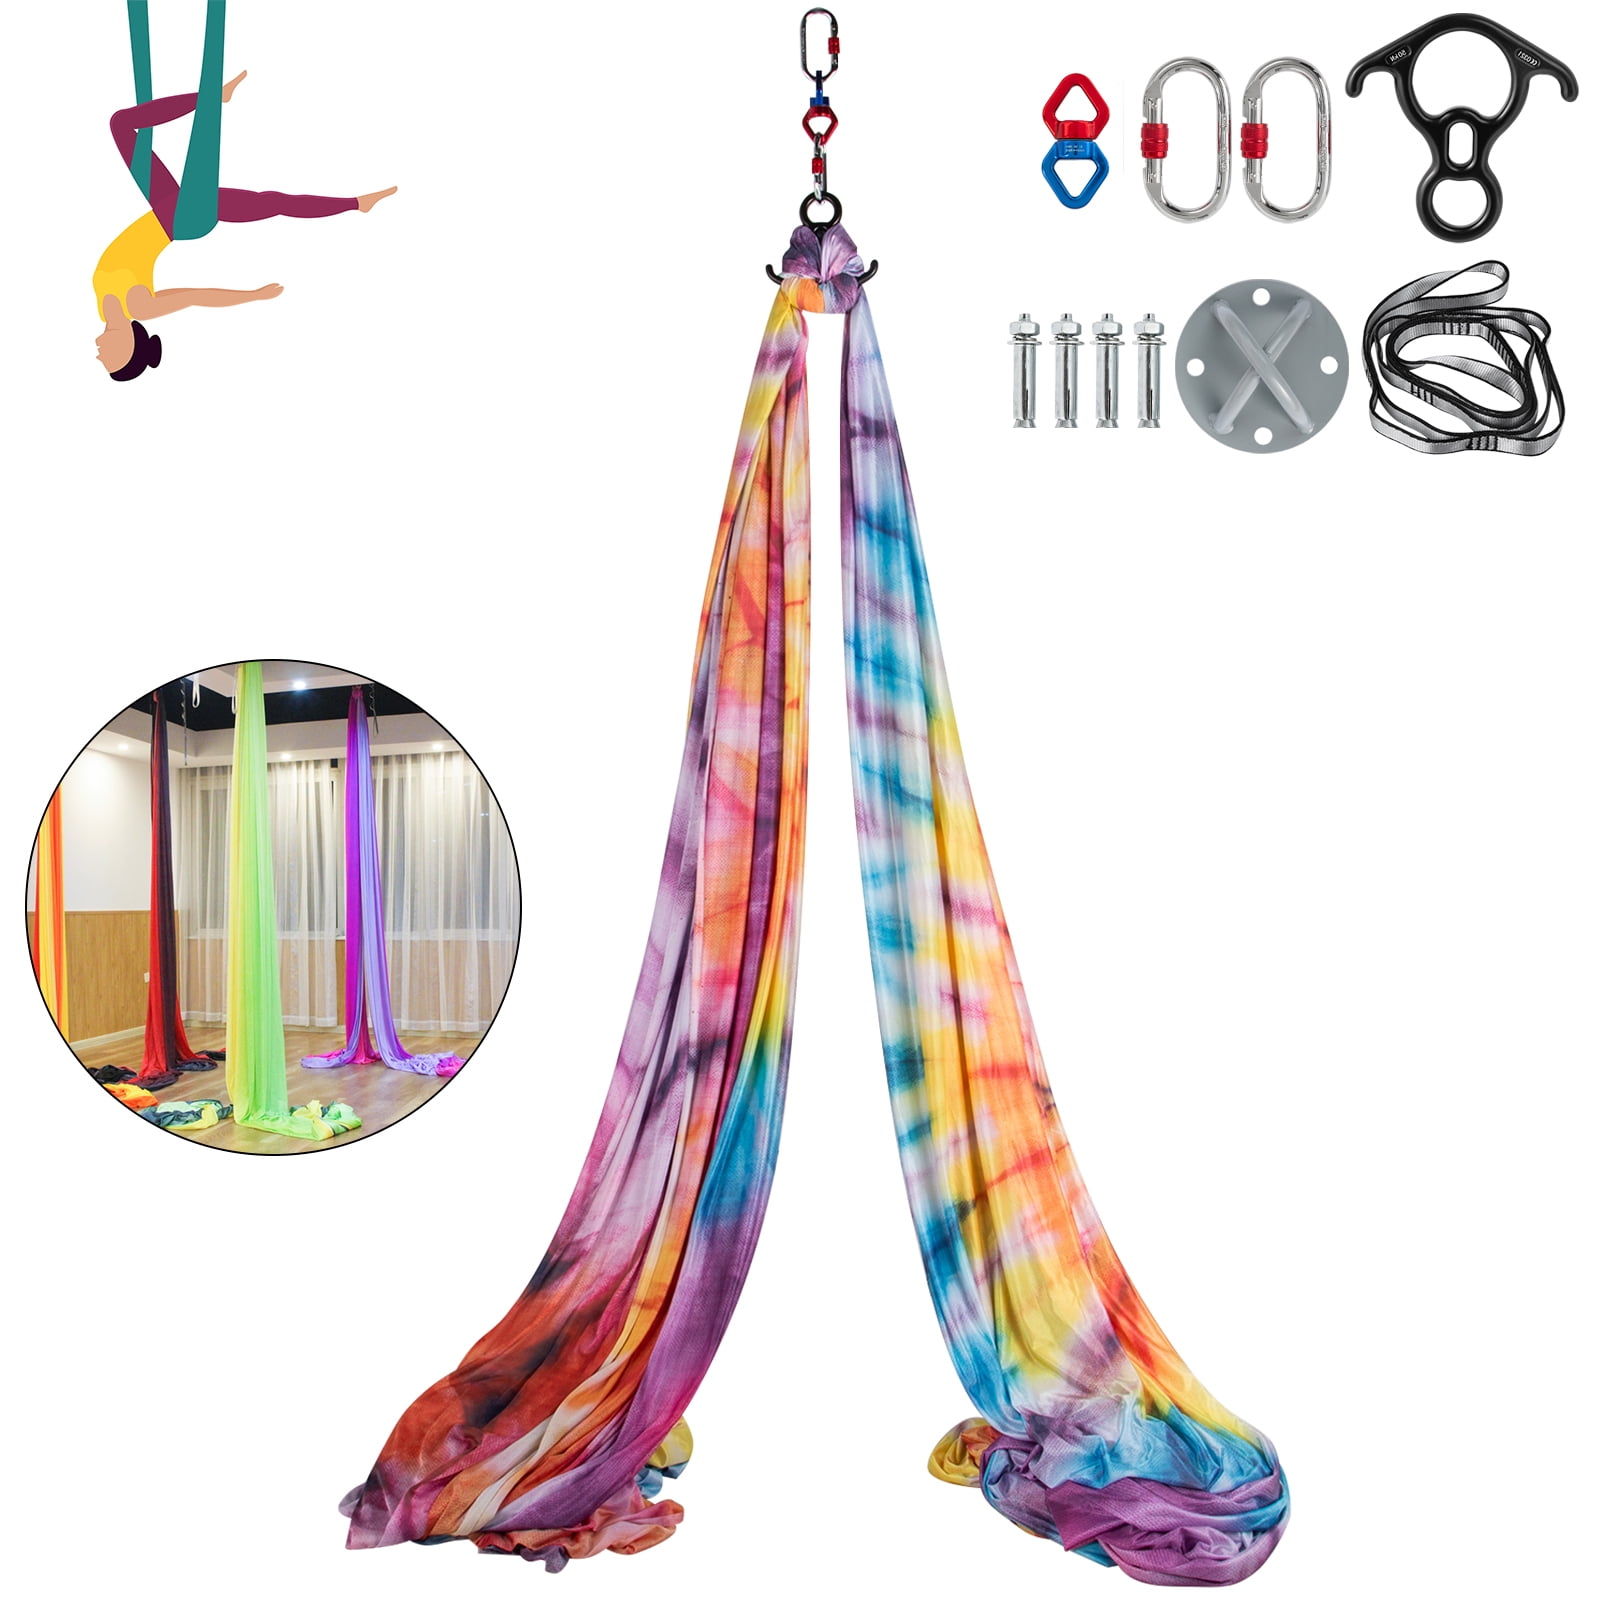 VEVOR Aerial Silk 11yd Aerial Yoga Swing Set 9.2ft Antigravity Ceiling  Hanging Yoga Sling - Carabiners Daisy Chain Inversion Swing,Colorful